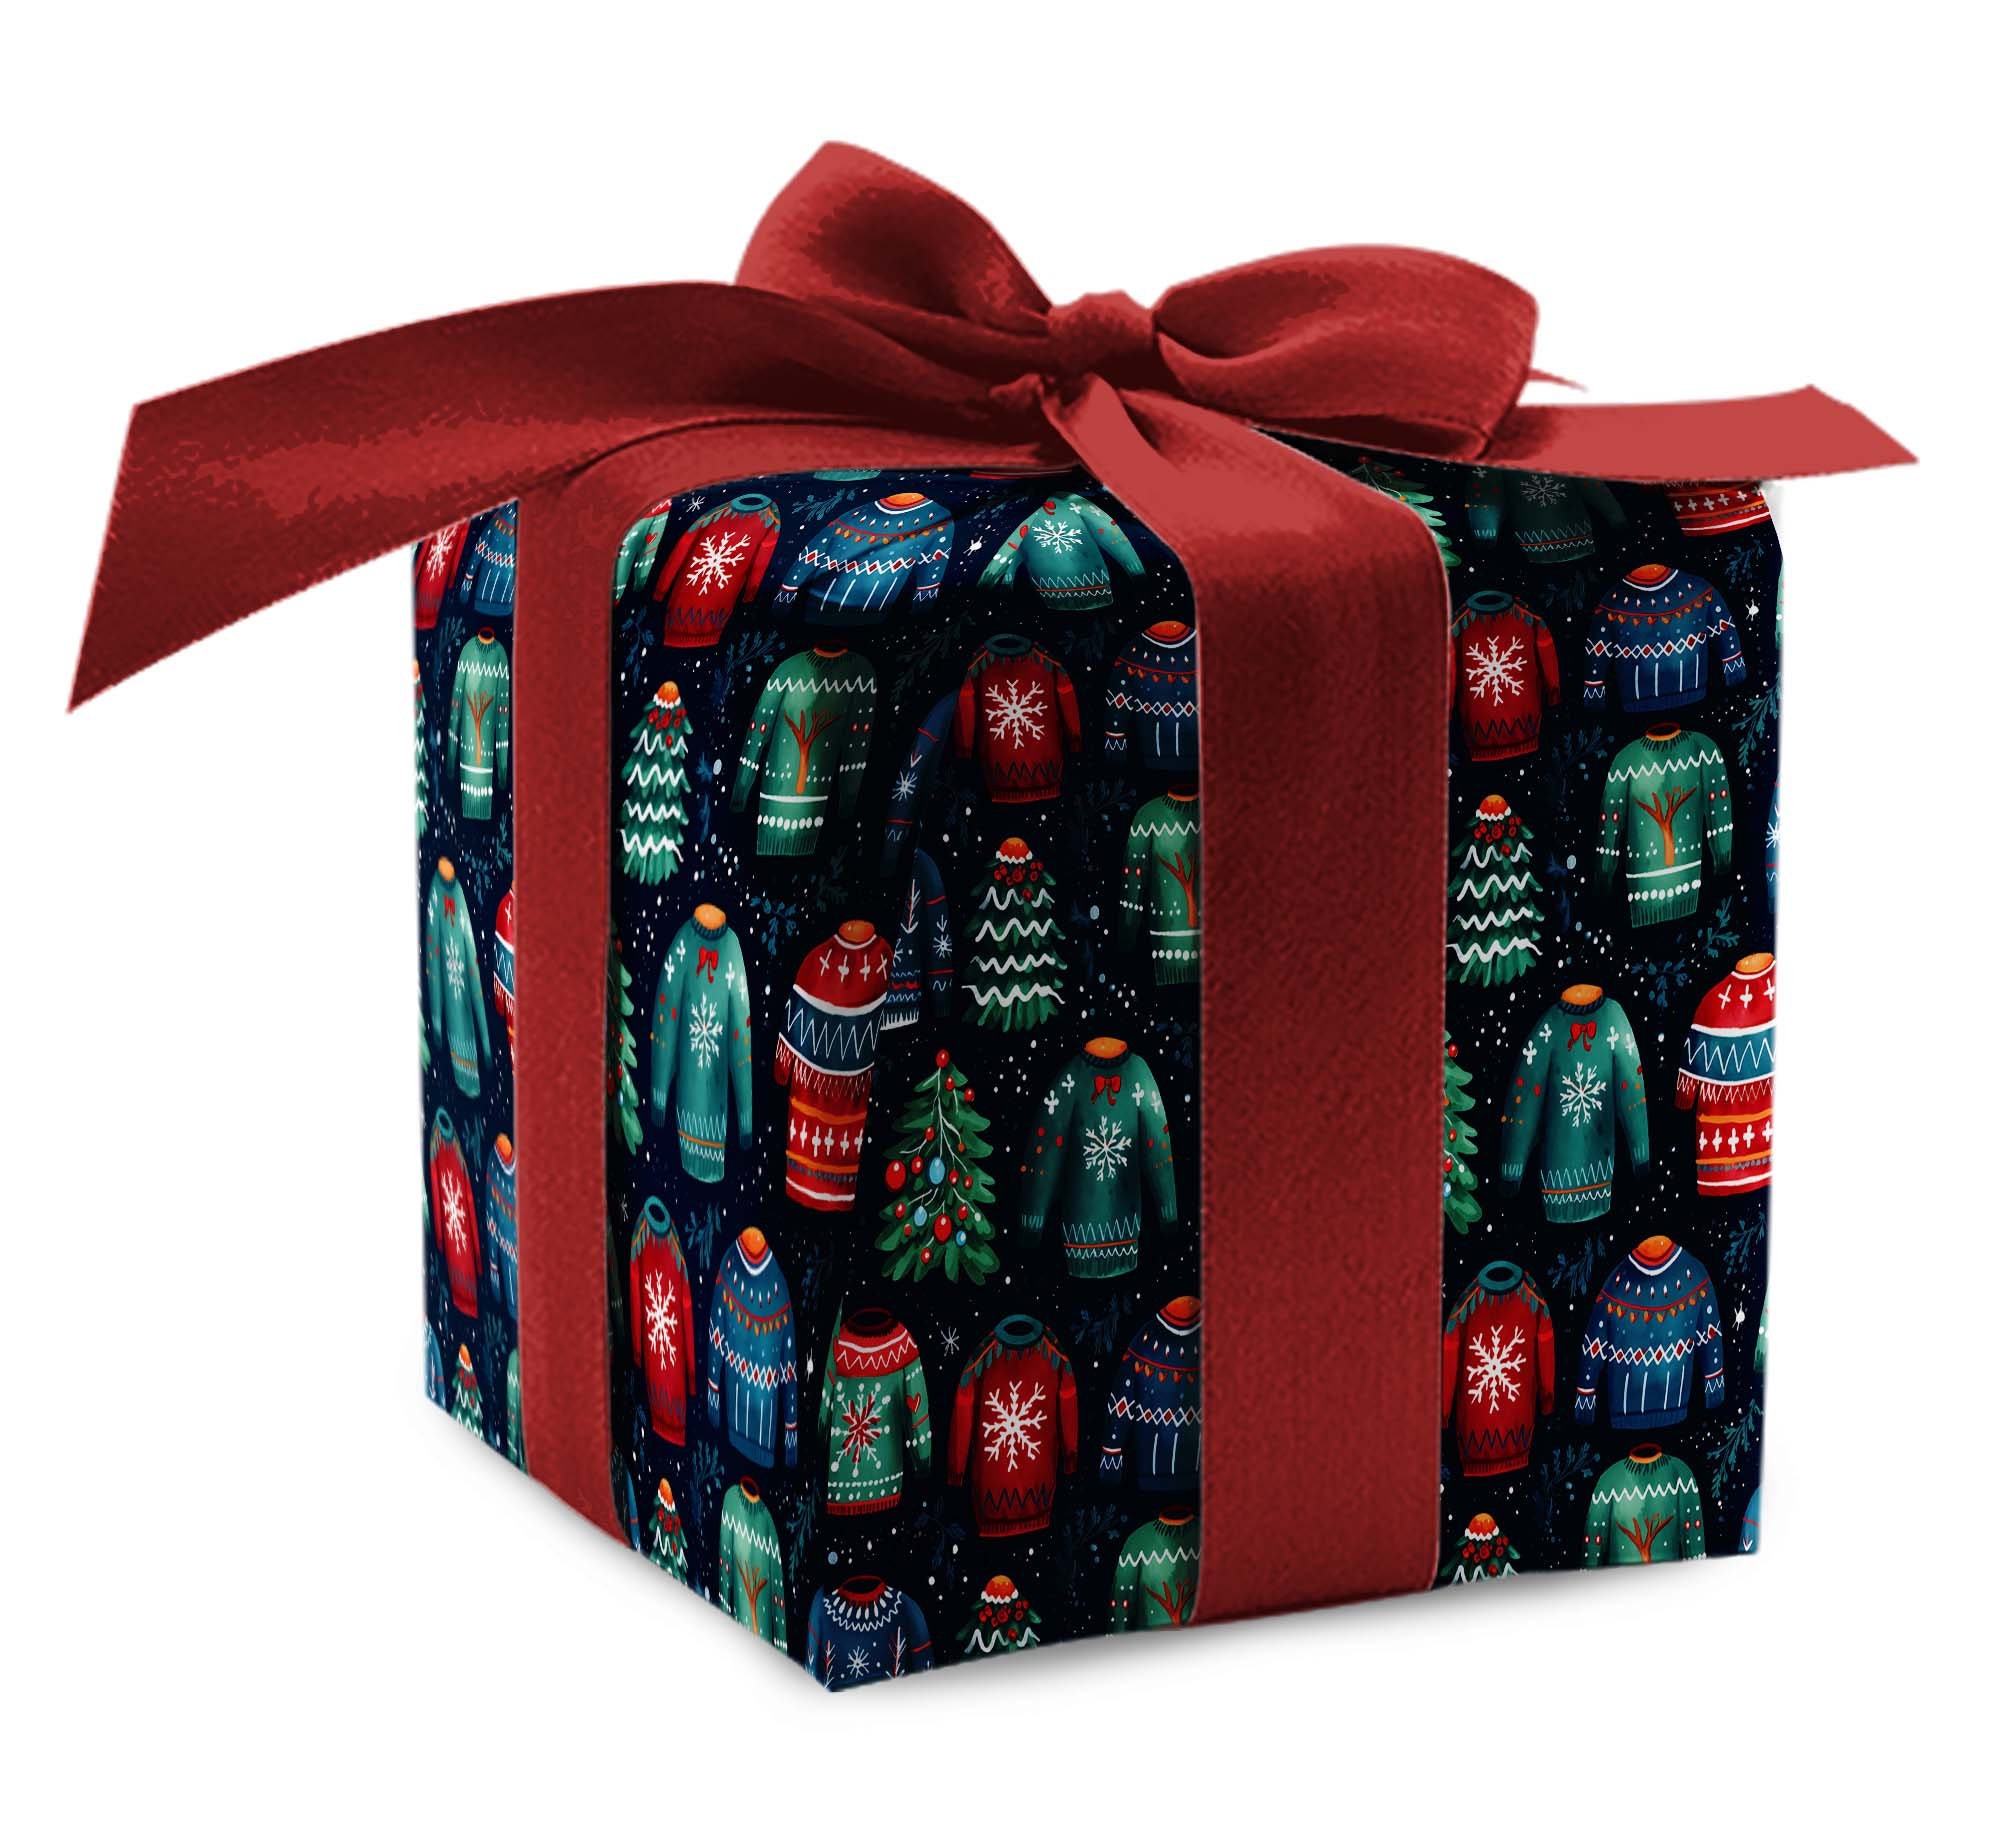 Festive Plaid Bigfoot Christmas Luxury Gift Wrap, Christmas Tree Cryptid  Theme Thick Wrapping Paper, Sasquatch Xmas Decoration (6 foot x 30 inch  roll)